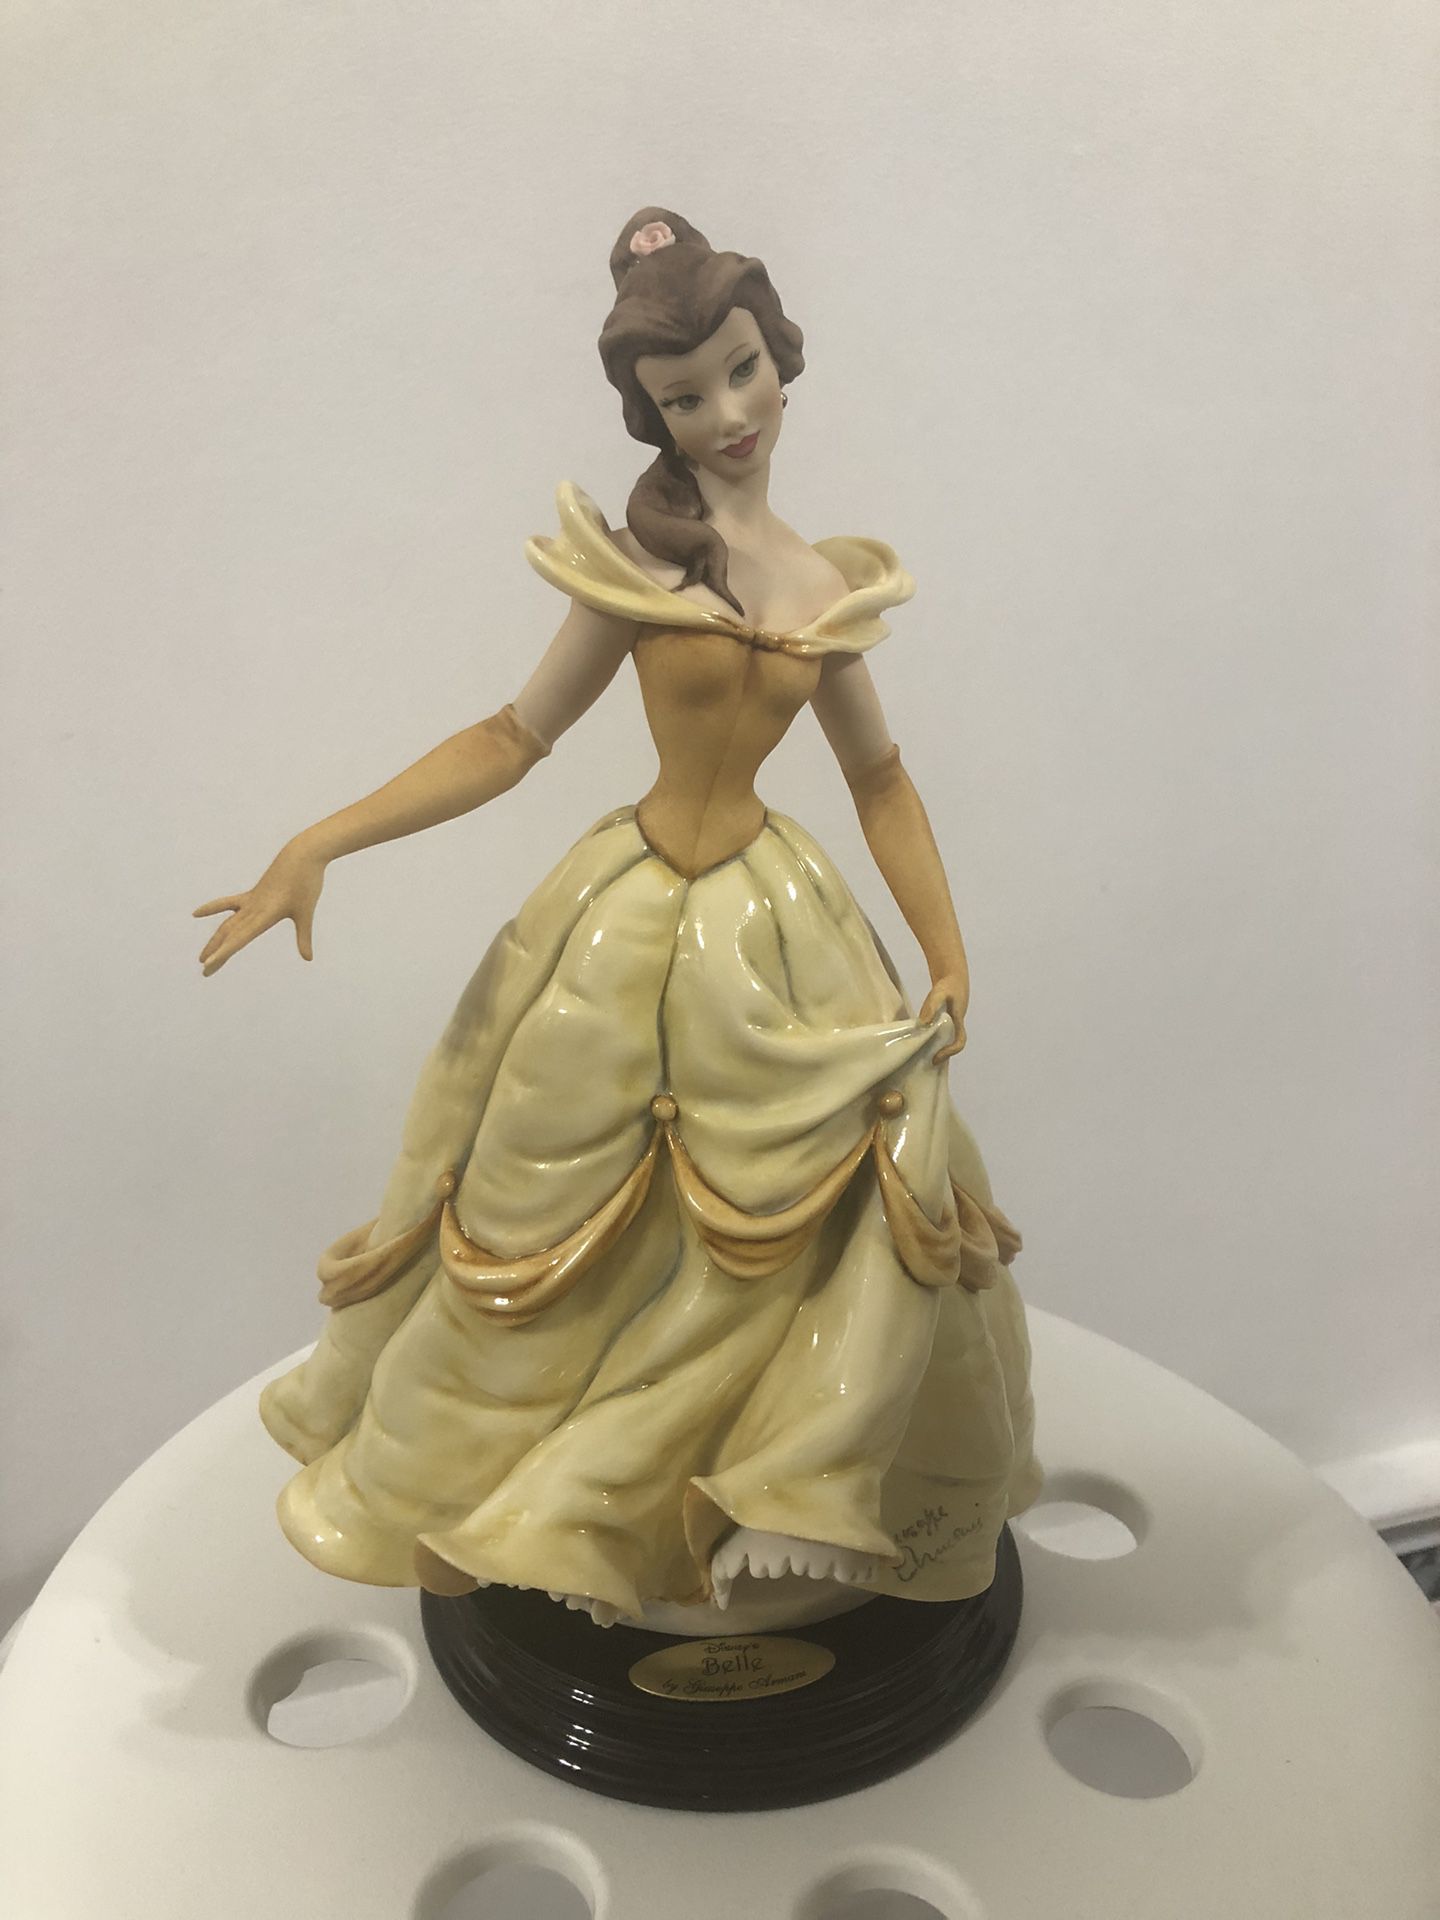 Disney’s Leading Ladies Collection: Belle By Giuseppe Armani 